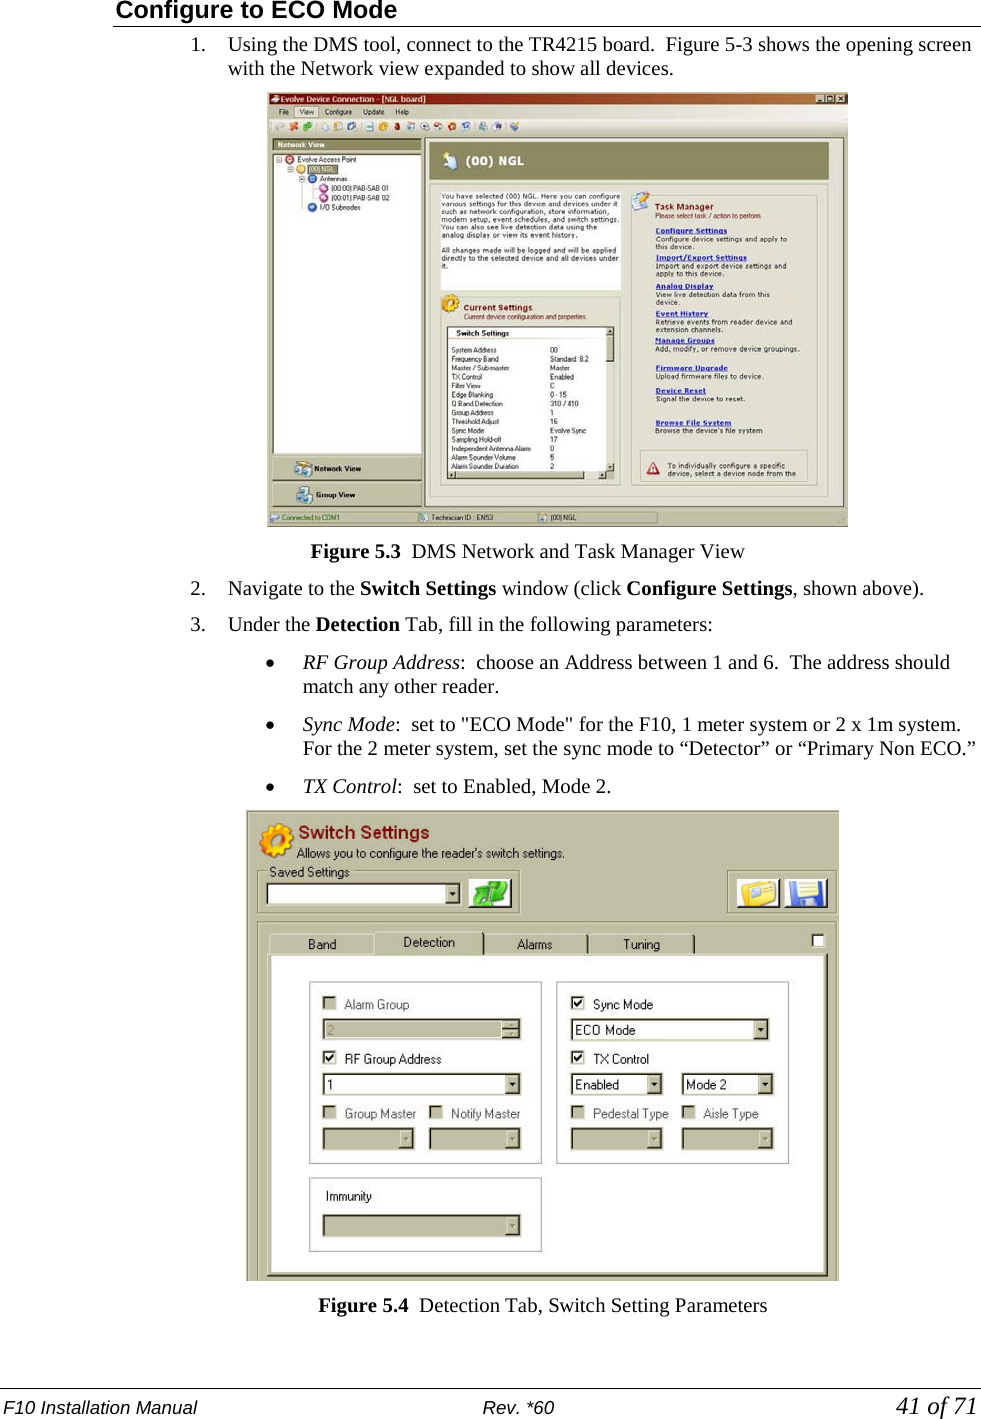 F10 Installation Manual                          Rev. *60            41 of 71 Configure to ECO Mode 1. Using the DMS tool, connect to the TR4215 board.  Figure 5-3 shows the opening screen with the Network view expanded to show all devices.  Figure 5.3  DMS Network and Task Manager View 2. Navigate to the Switch Settings window (click Configure Settings, shown above).   3. Under the Detection Tab, fill in the following parameters: • RF Group Address:  choose an Address between 1 and 6.  The address should match any other reader.  • Sync Mode:  set to &quot;ECO Mode&quot; for the F10, 1 meter system or 2 x 1m system. For the 2 meter system, set the sync mode to “Detector” or “Primary Non ECO.” • TX Control:  set to Enabled, Mode 2.  Figure 5.4  Detection Tab, Switch Setting Parameters 